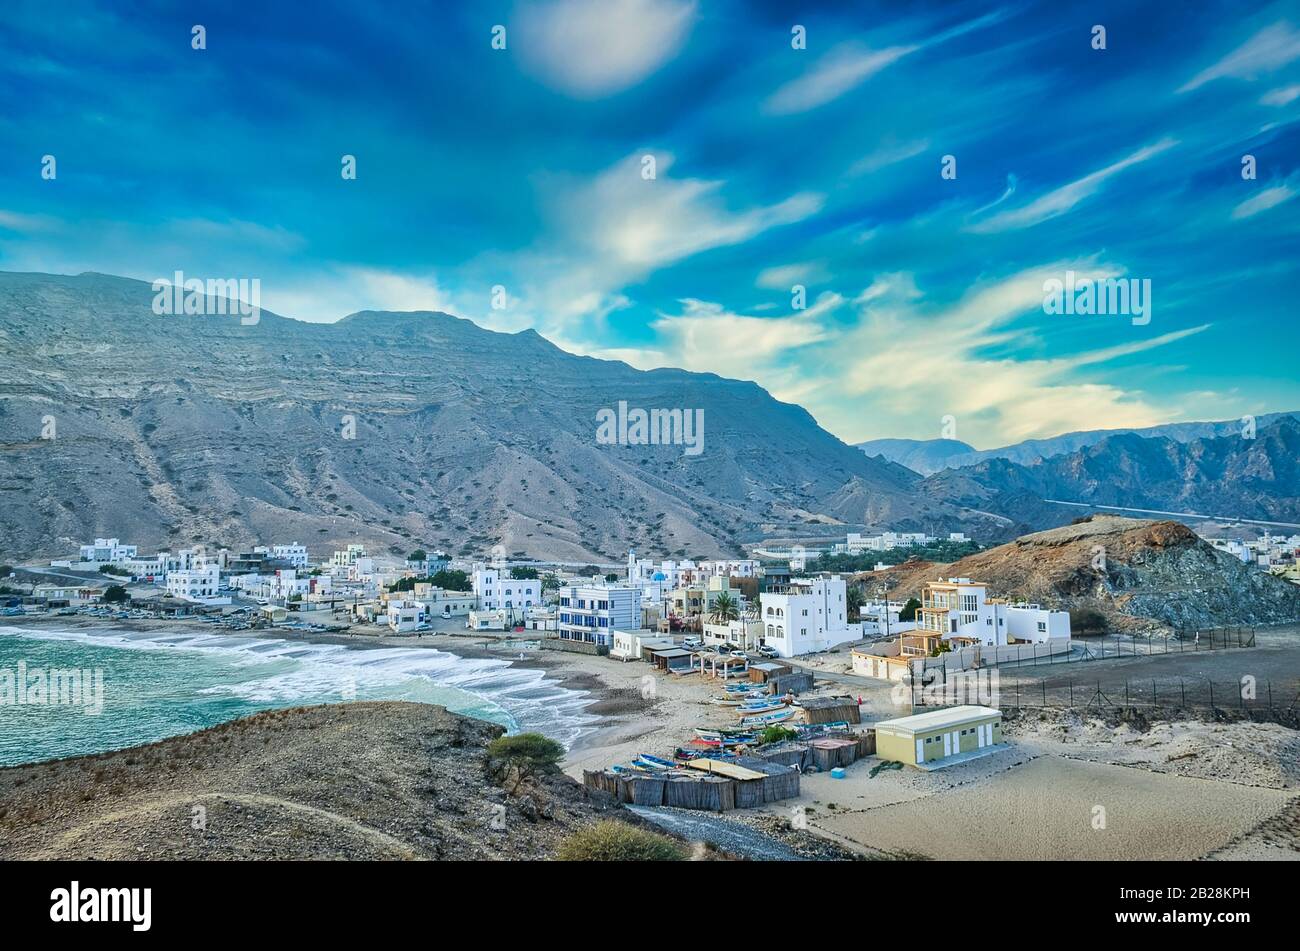 Aerial view of a small fishing village in the valley. From Muscat, Oman. Stock Photo